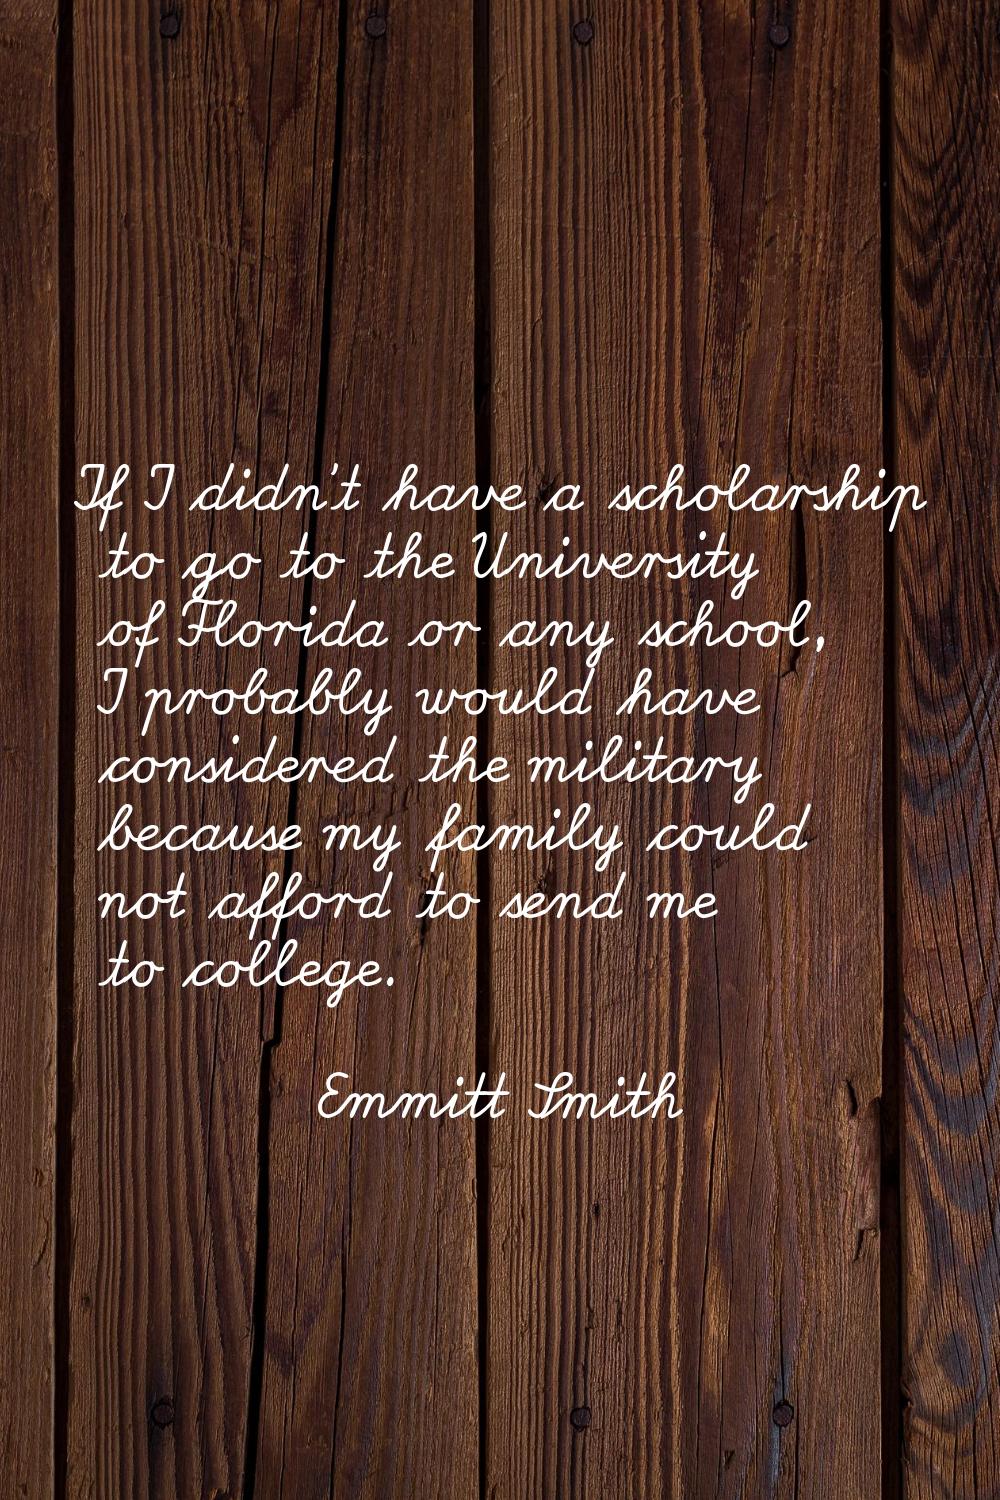 If I didn't have a scholarship to go to the University of Florida or any school, I probably would h